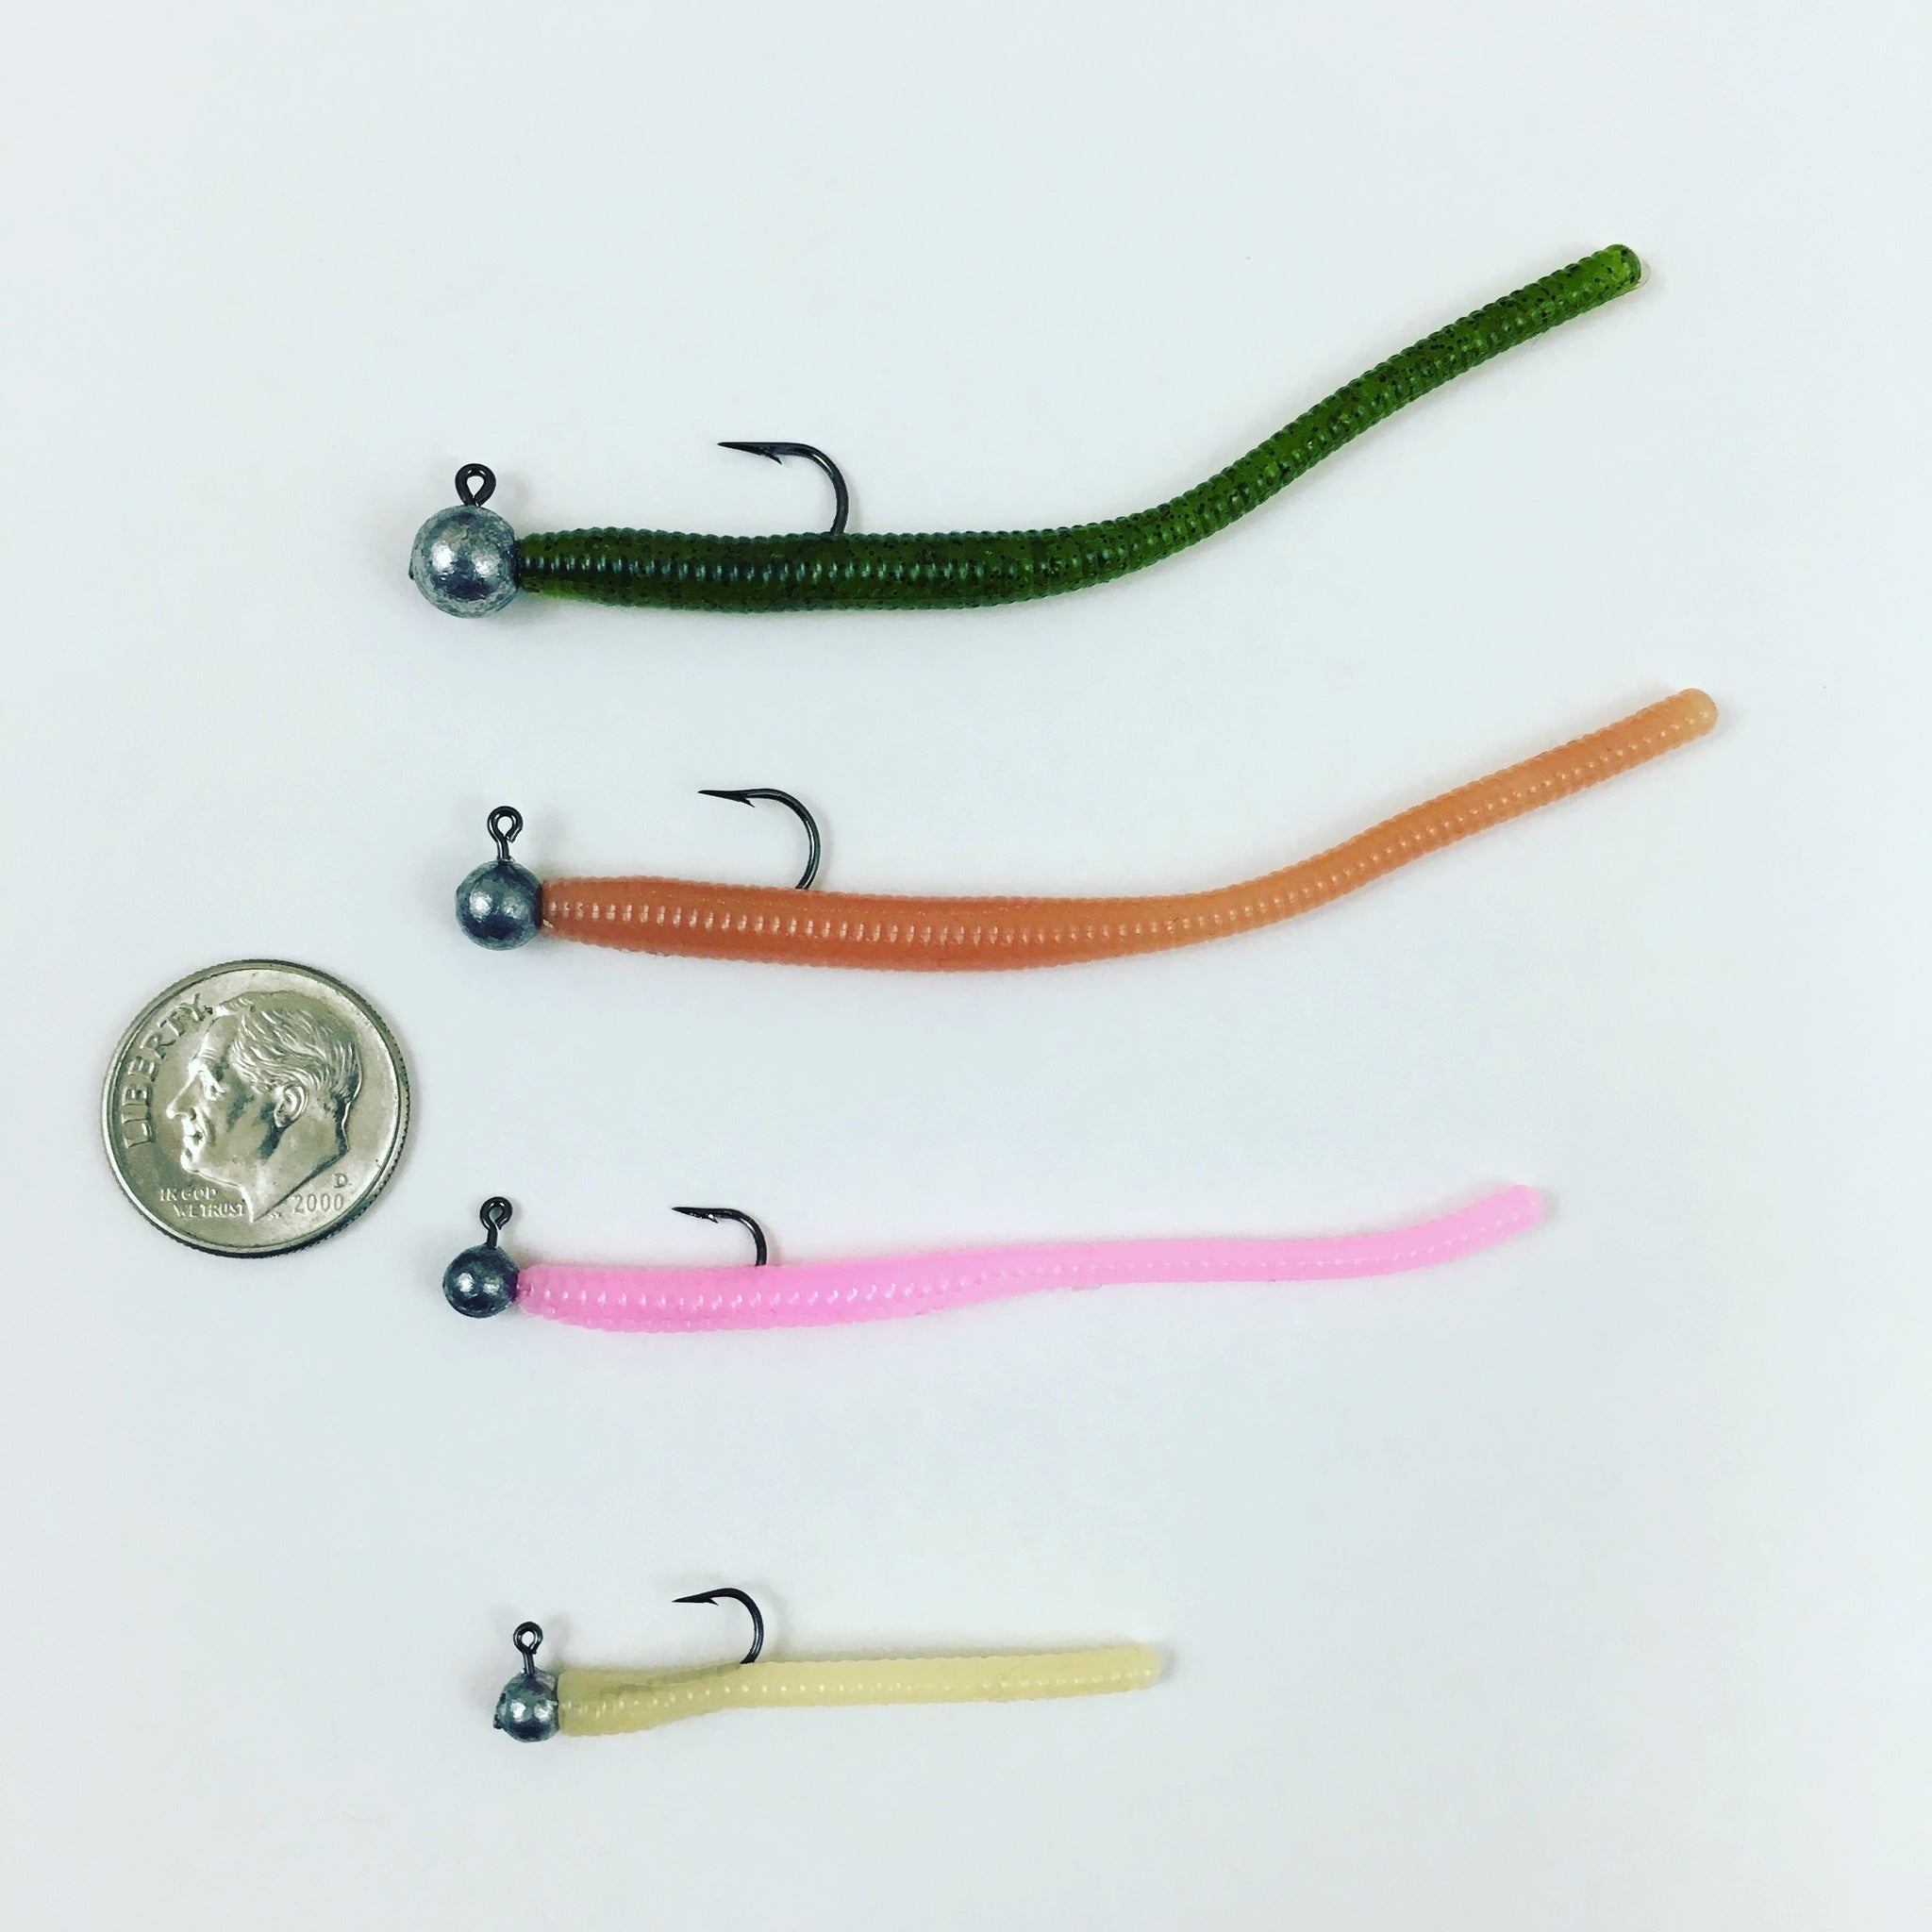 Trout Worms: Watermelon Candy